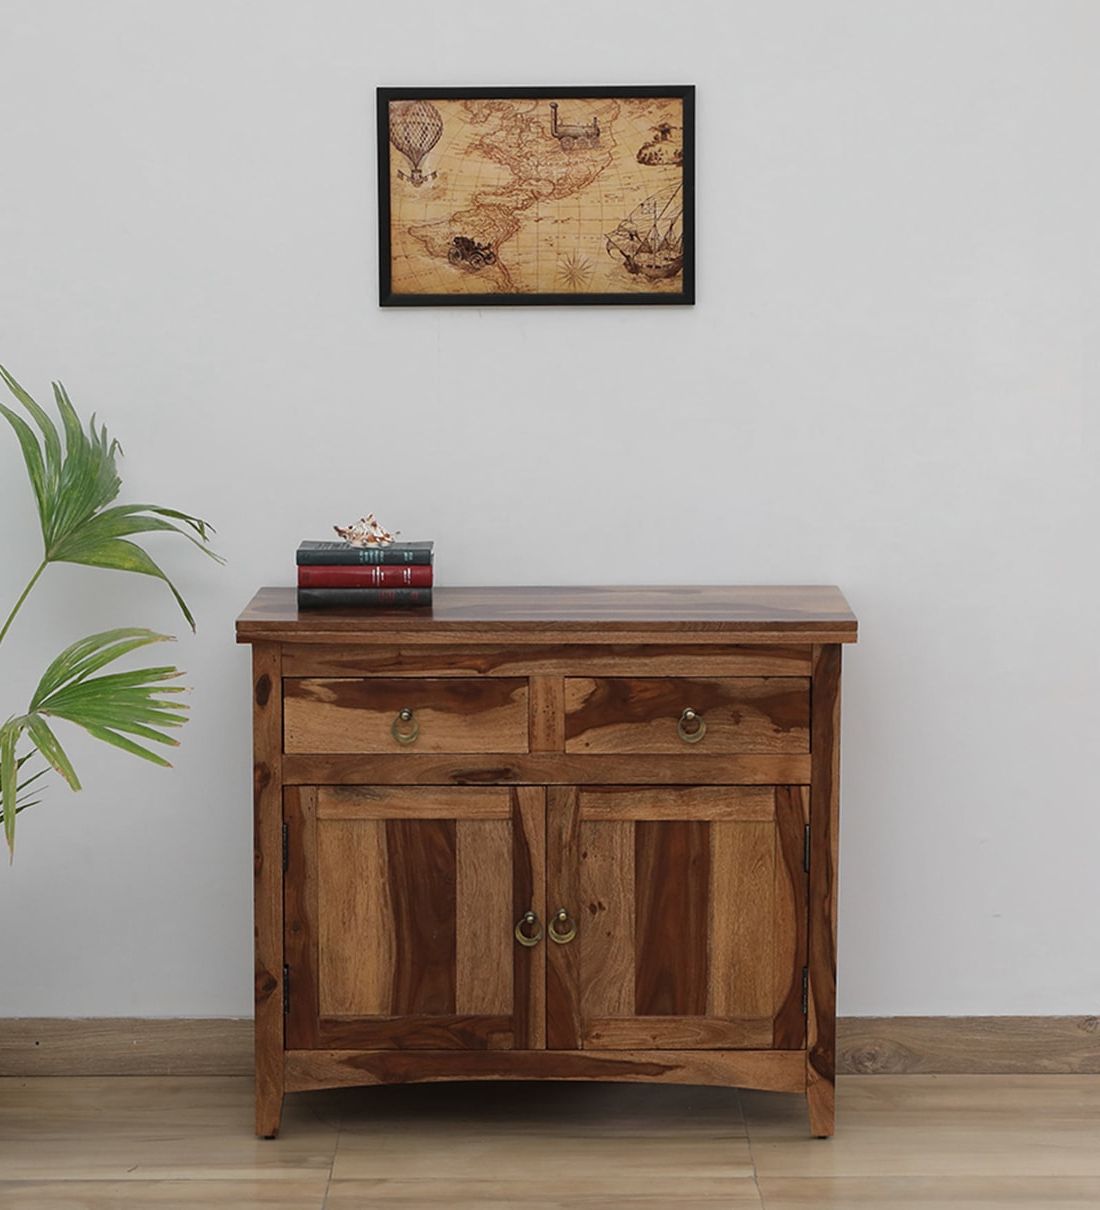 [%buy Biscay Sheesham Wood Sideboard In Scratch Resistant Rustic Teak Finish  At 2% Offwoodsworth From Pepperfry | Pepperfry With Best And Newest Brown Finished Wood Sideboards|brown Finished Wood Sideboards Intended For Fashionable Buy Biscay Sheesham Wood Sideboard In Scratch Resistant Rustic Teak Finish  At 2% Offwoodsworth From Pepperfry | Pepperfry|preferred Brown Finished Wood Sideboards Intended For Buy Biscay Sheesham Wood Sideboard In Scratch Resistant Rustic Teak Finish  At 2% Offwoodsworth From Pepperfry | Pepperfry|favorite Buy Biscay Sheesham Wood Sideboard In Scratch Resistant Rustic Teak Finish  At 2% Offwoodsworth From Pepperfry | Pepperfry With Brown Finished Wood Sideboards%] (Photo 5 of 15)